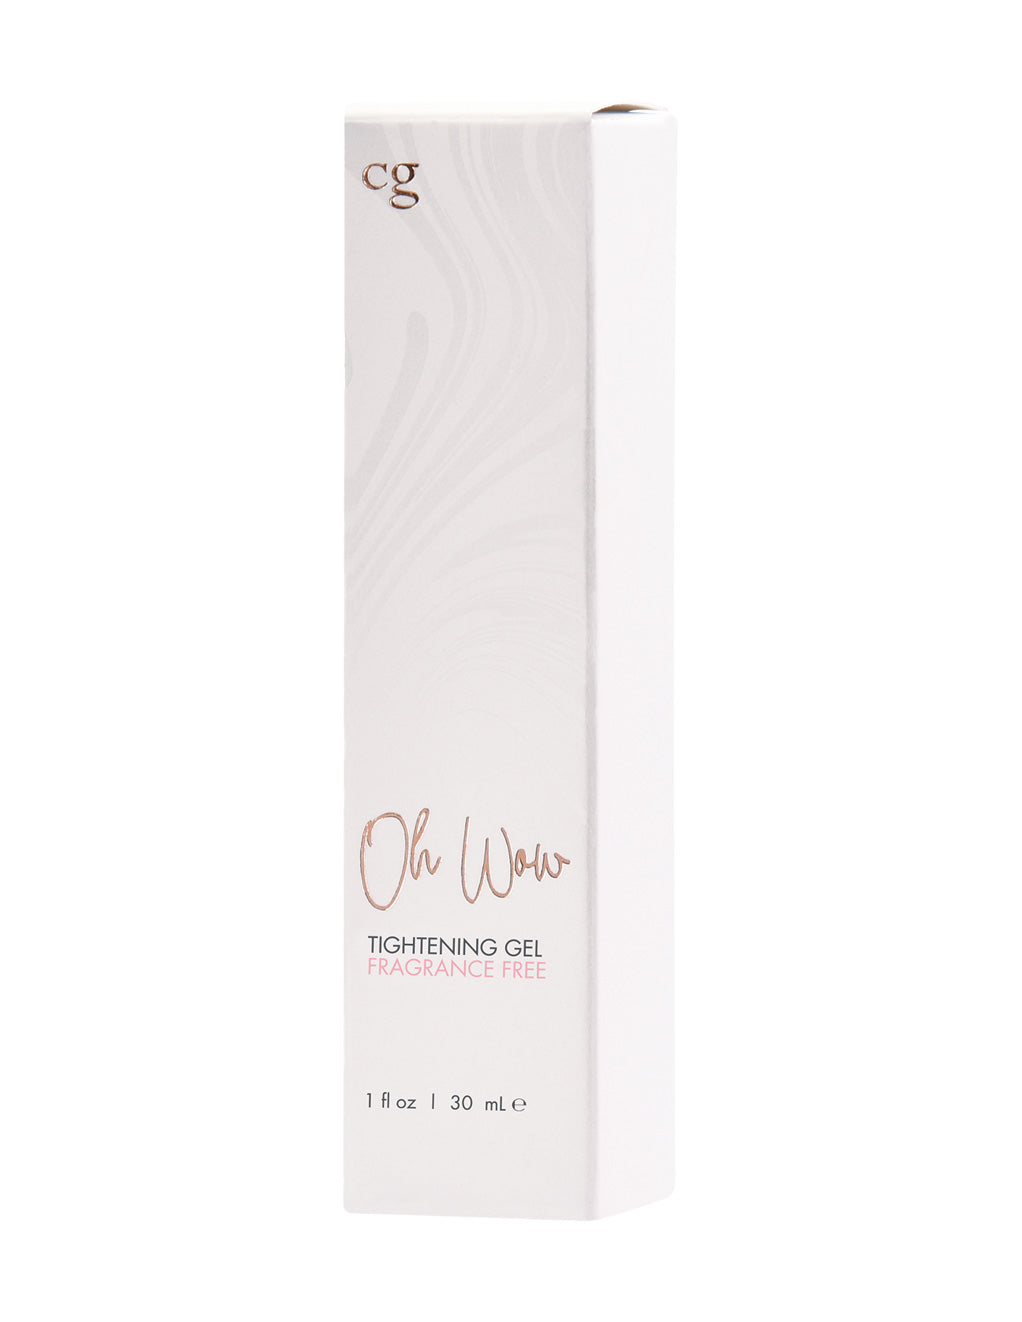 Oh Wow Tightening Gel 1oz Box Front